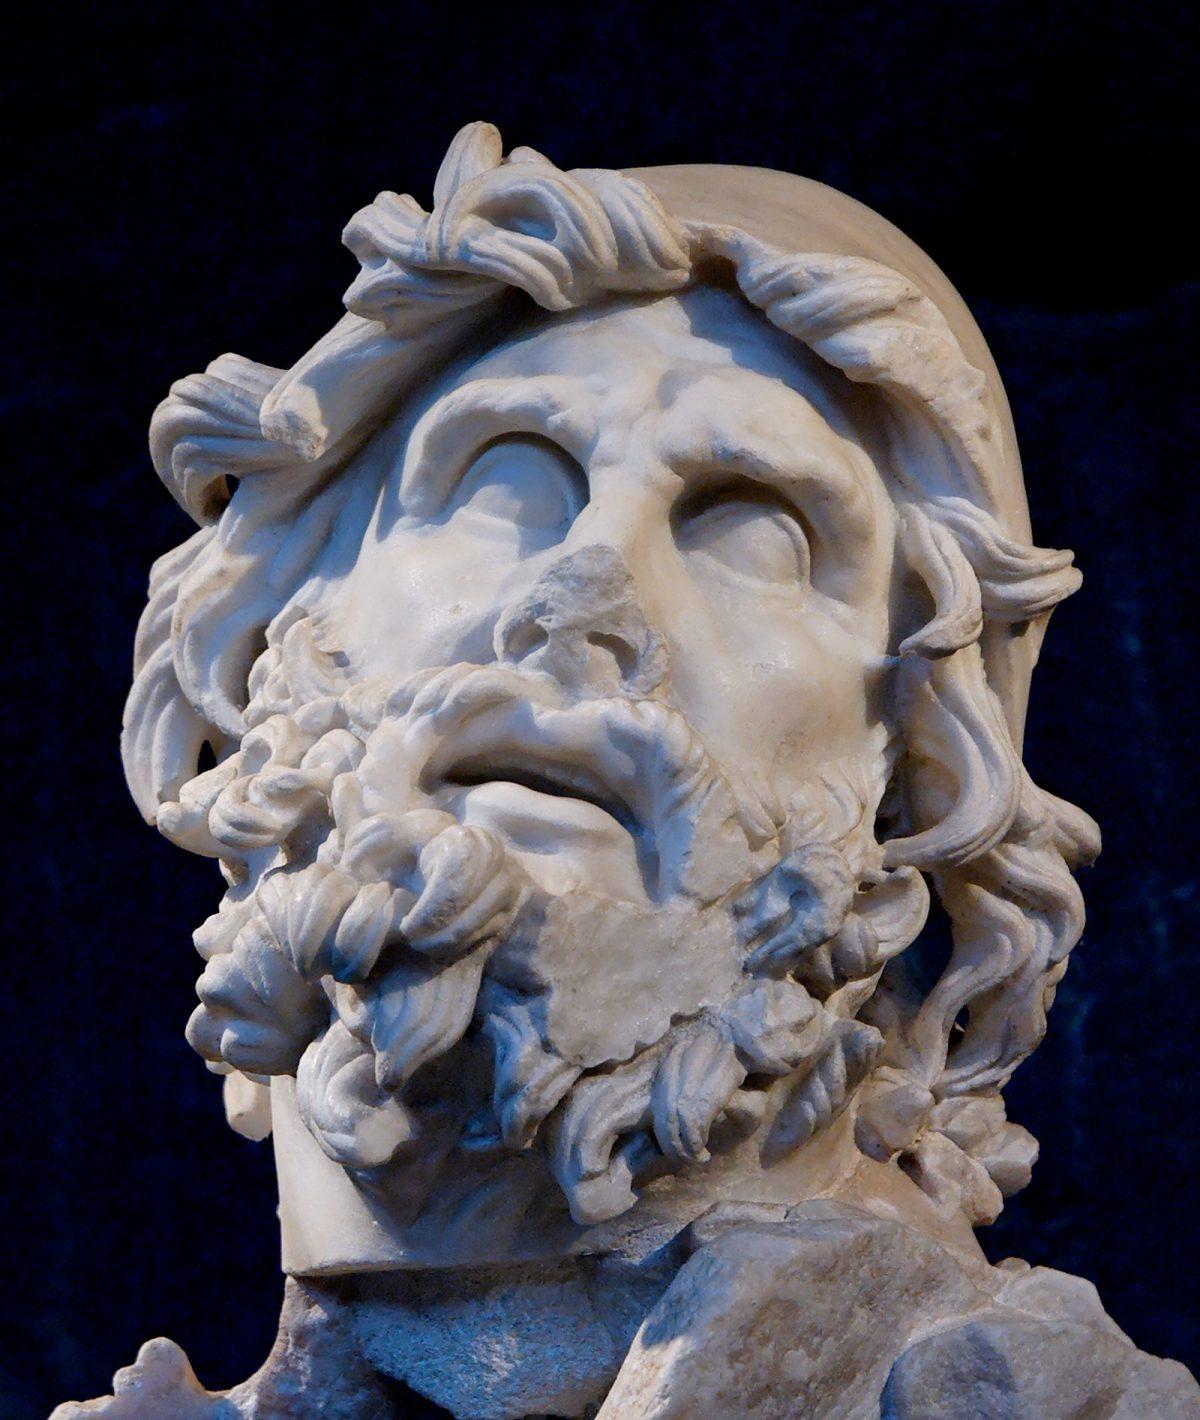 Head of Odysseus. Marble, Greek, A.D. first century. The Archaeological Museum of Sperlonga. (Public Domain)